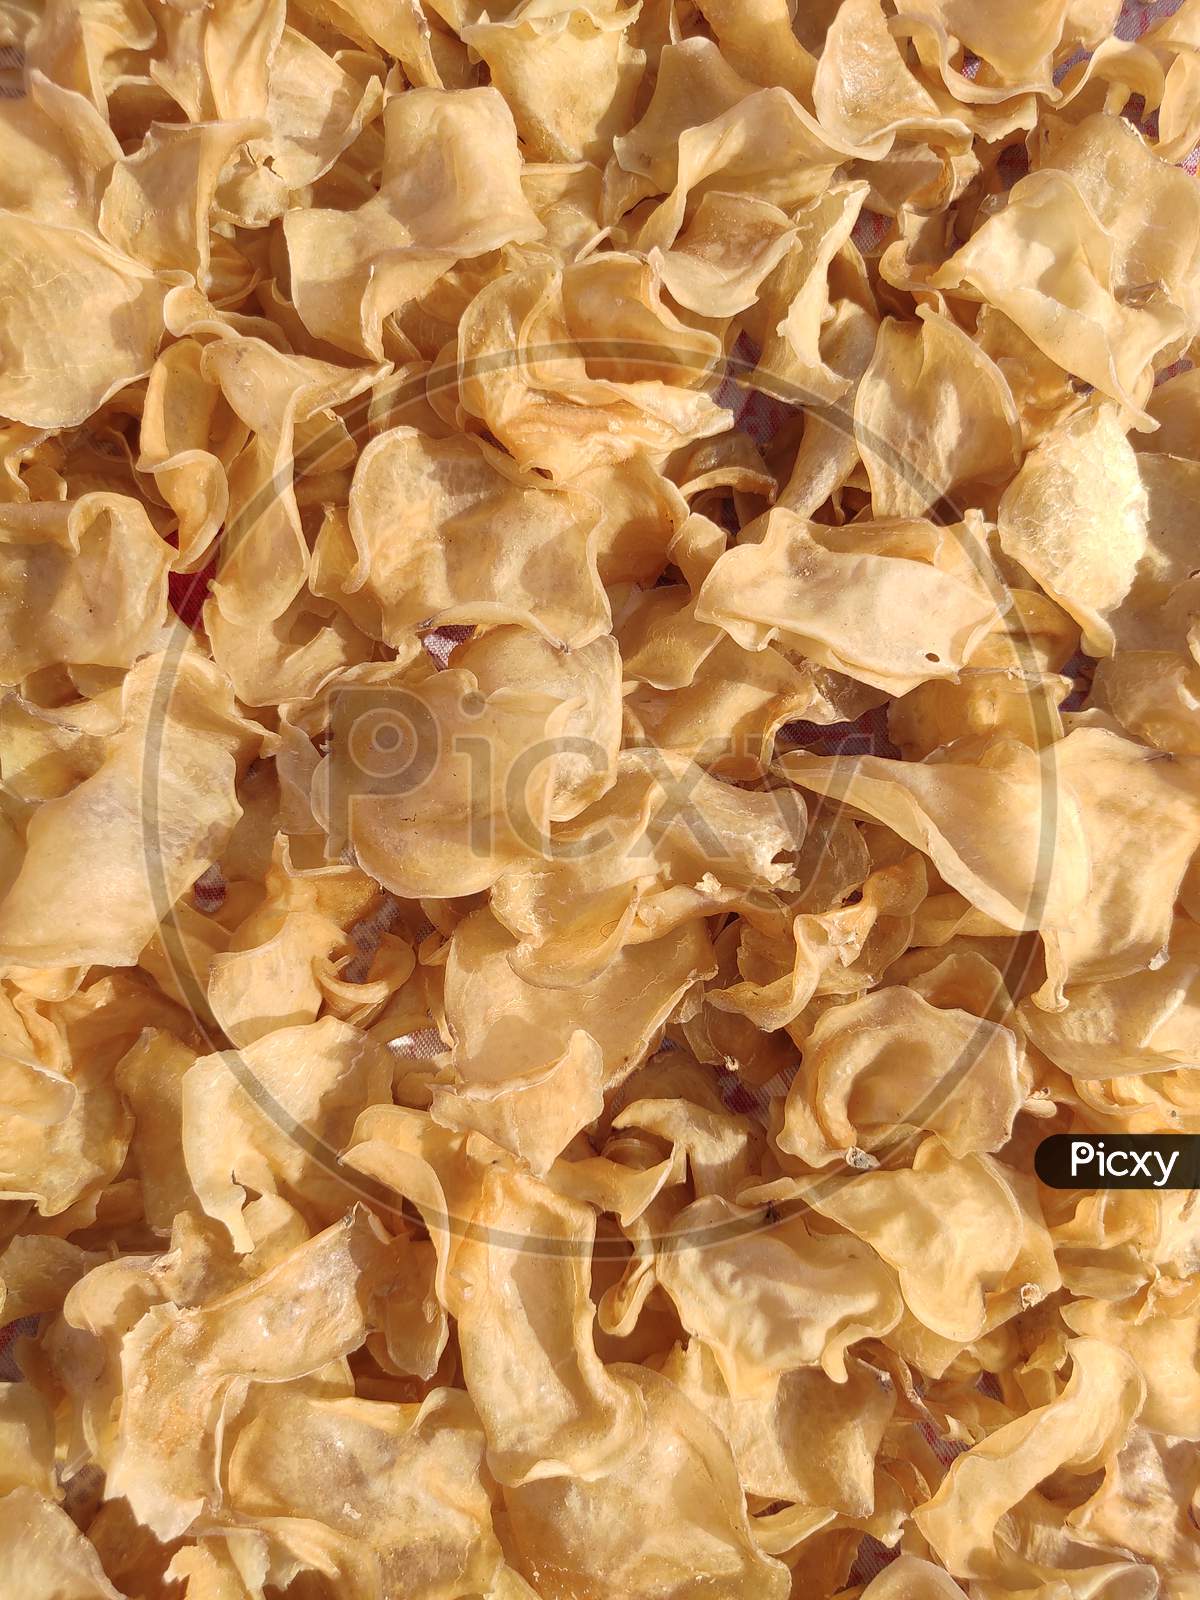 Uncooked sun dry potato chips slices top view